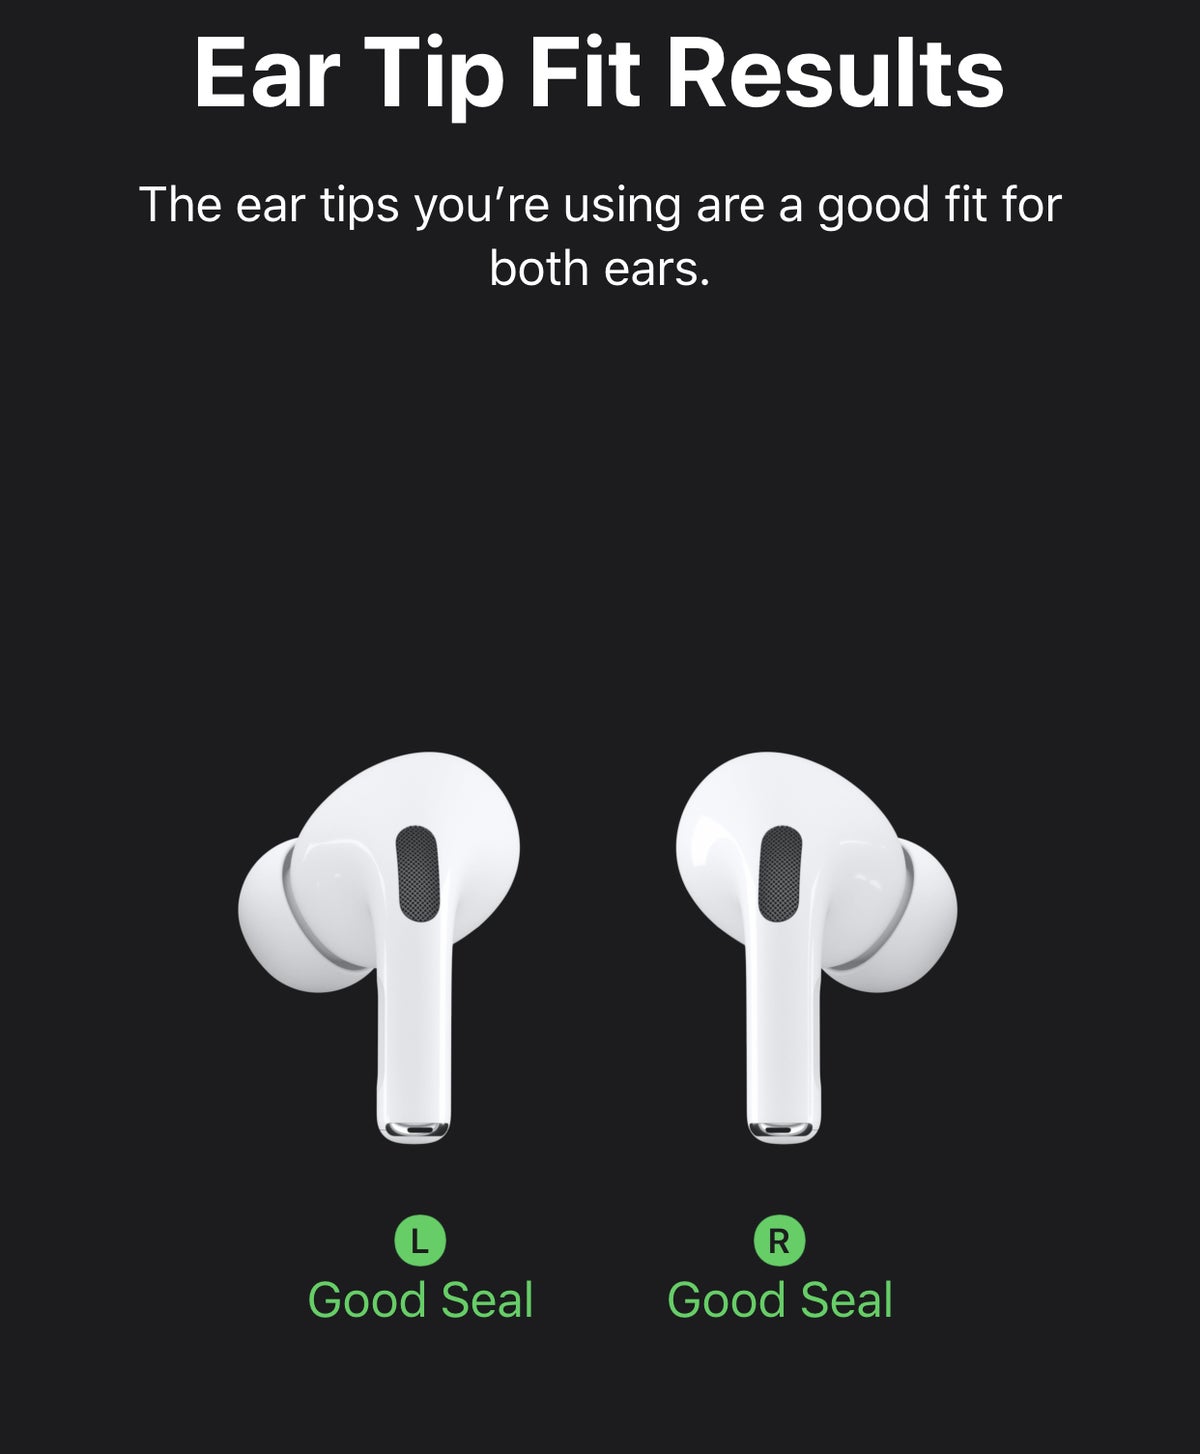 Ear Tip Fit Test AirPods Pro